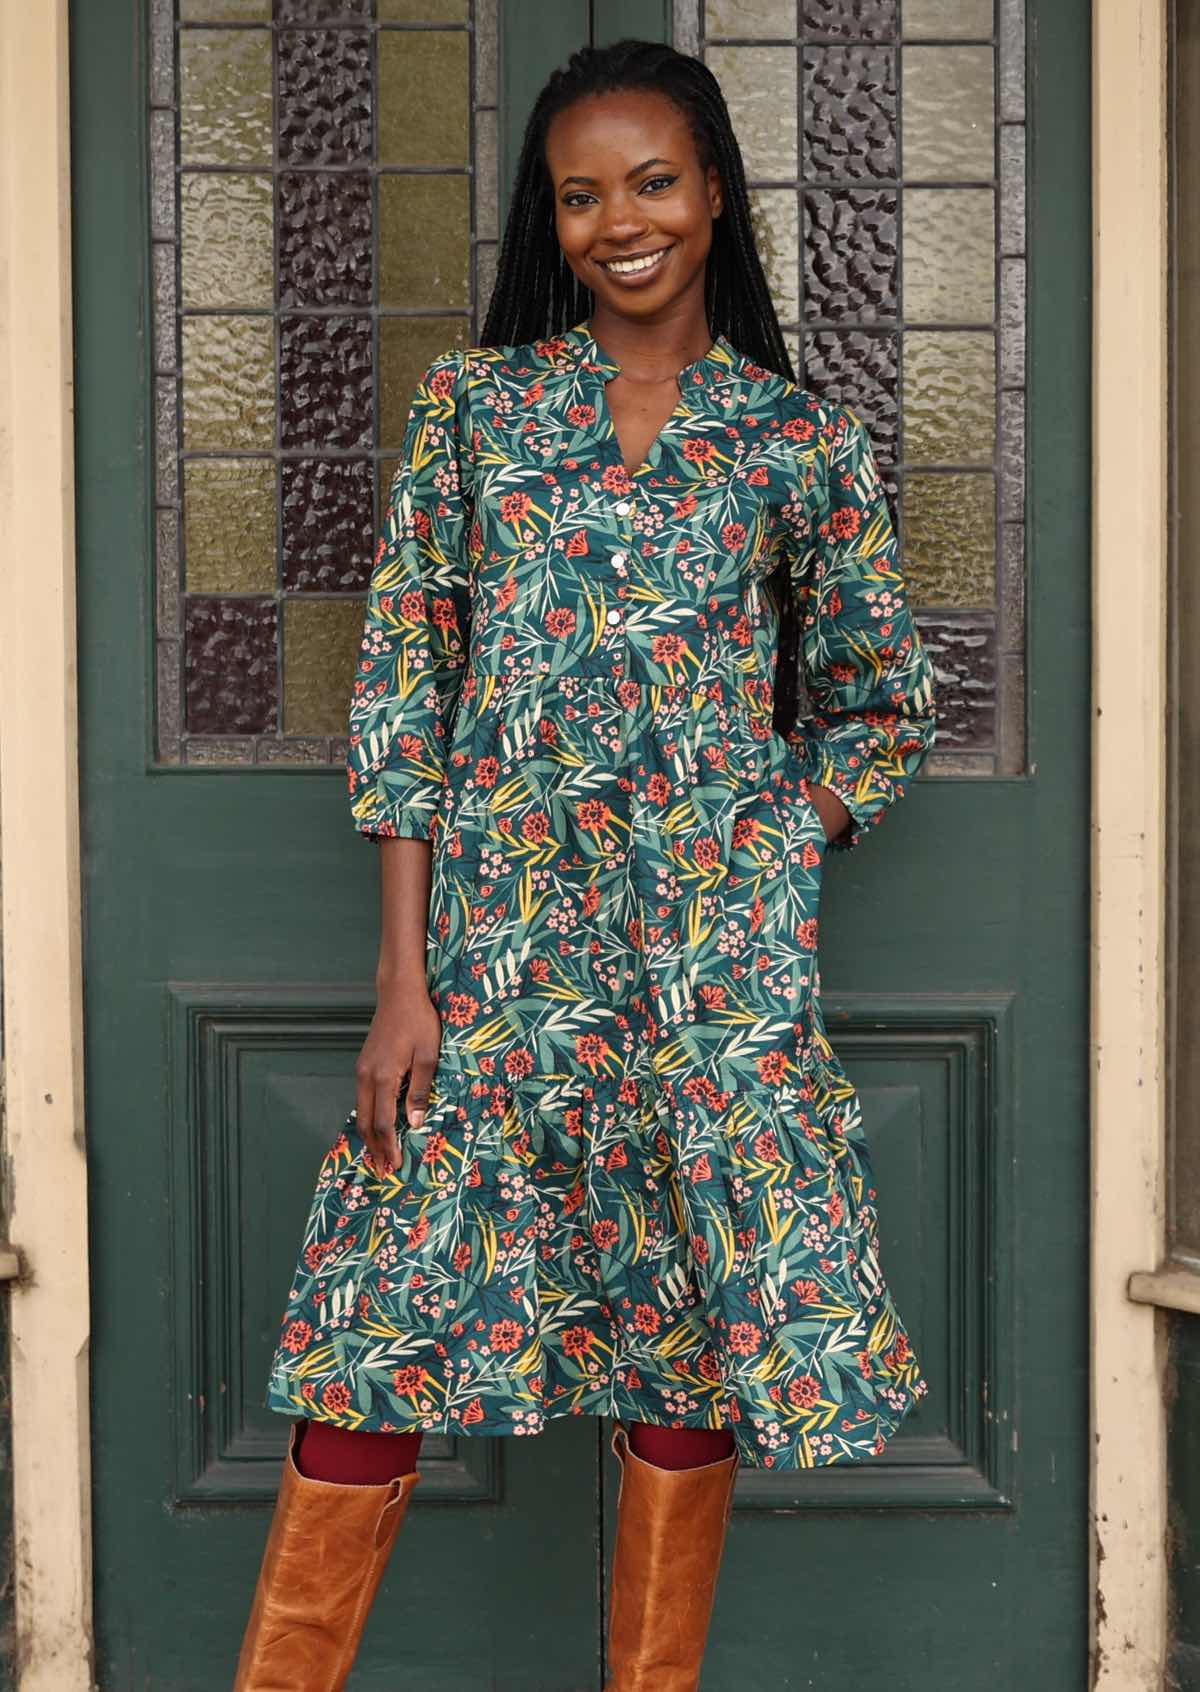 Green cotton floral dress on woman standing in doorway